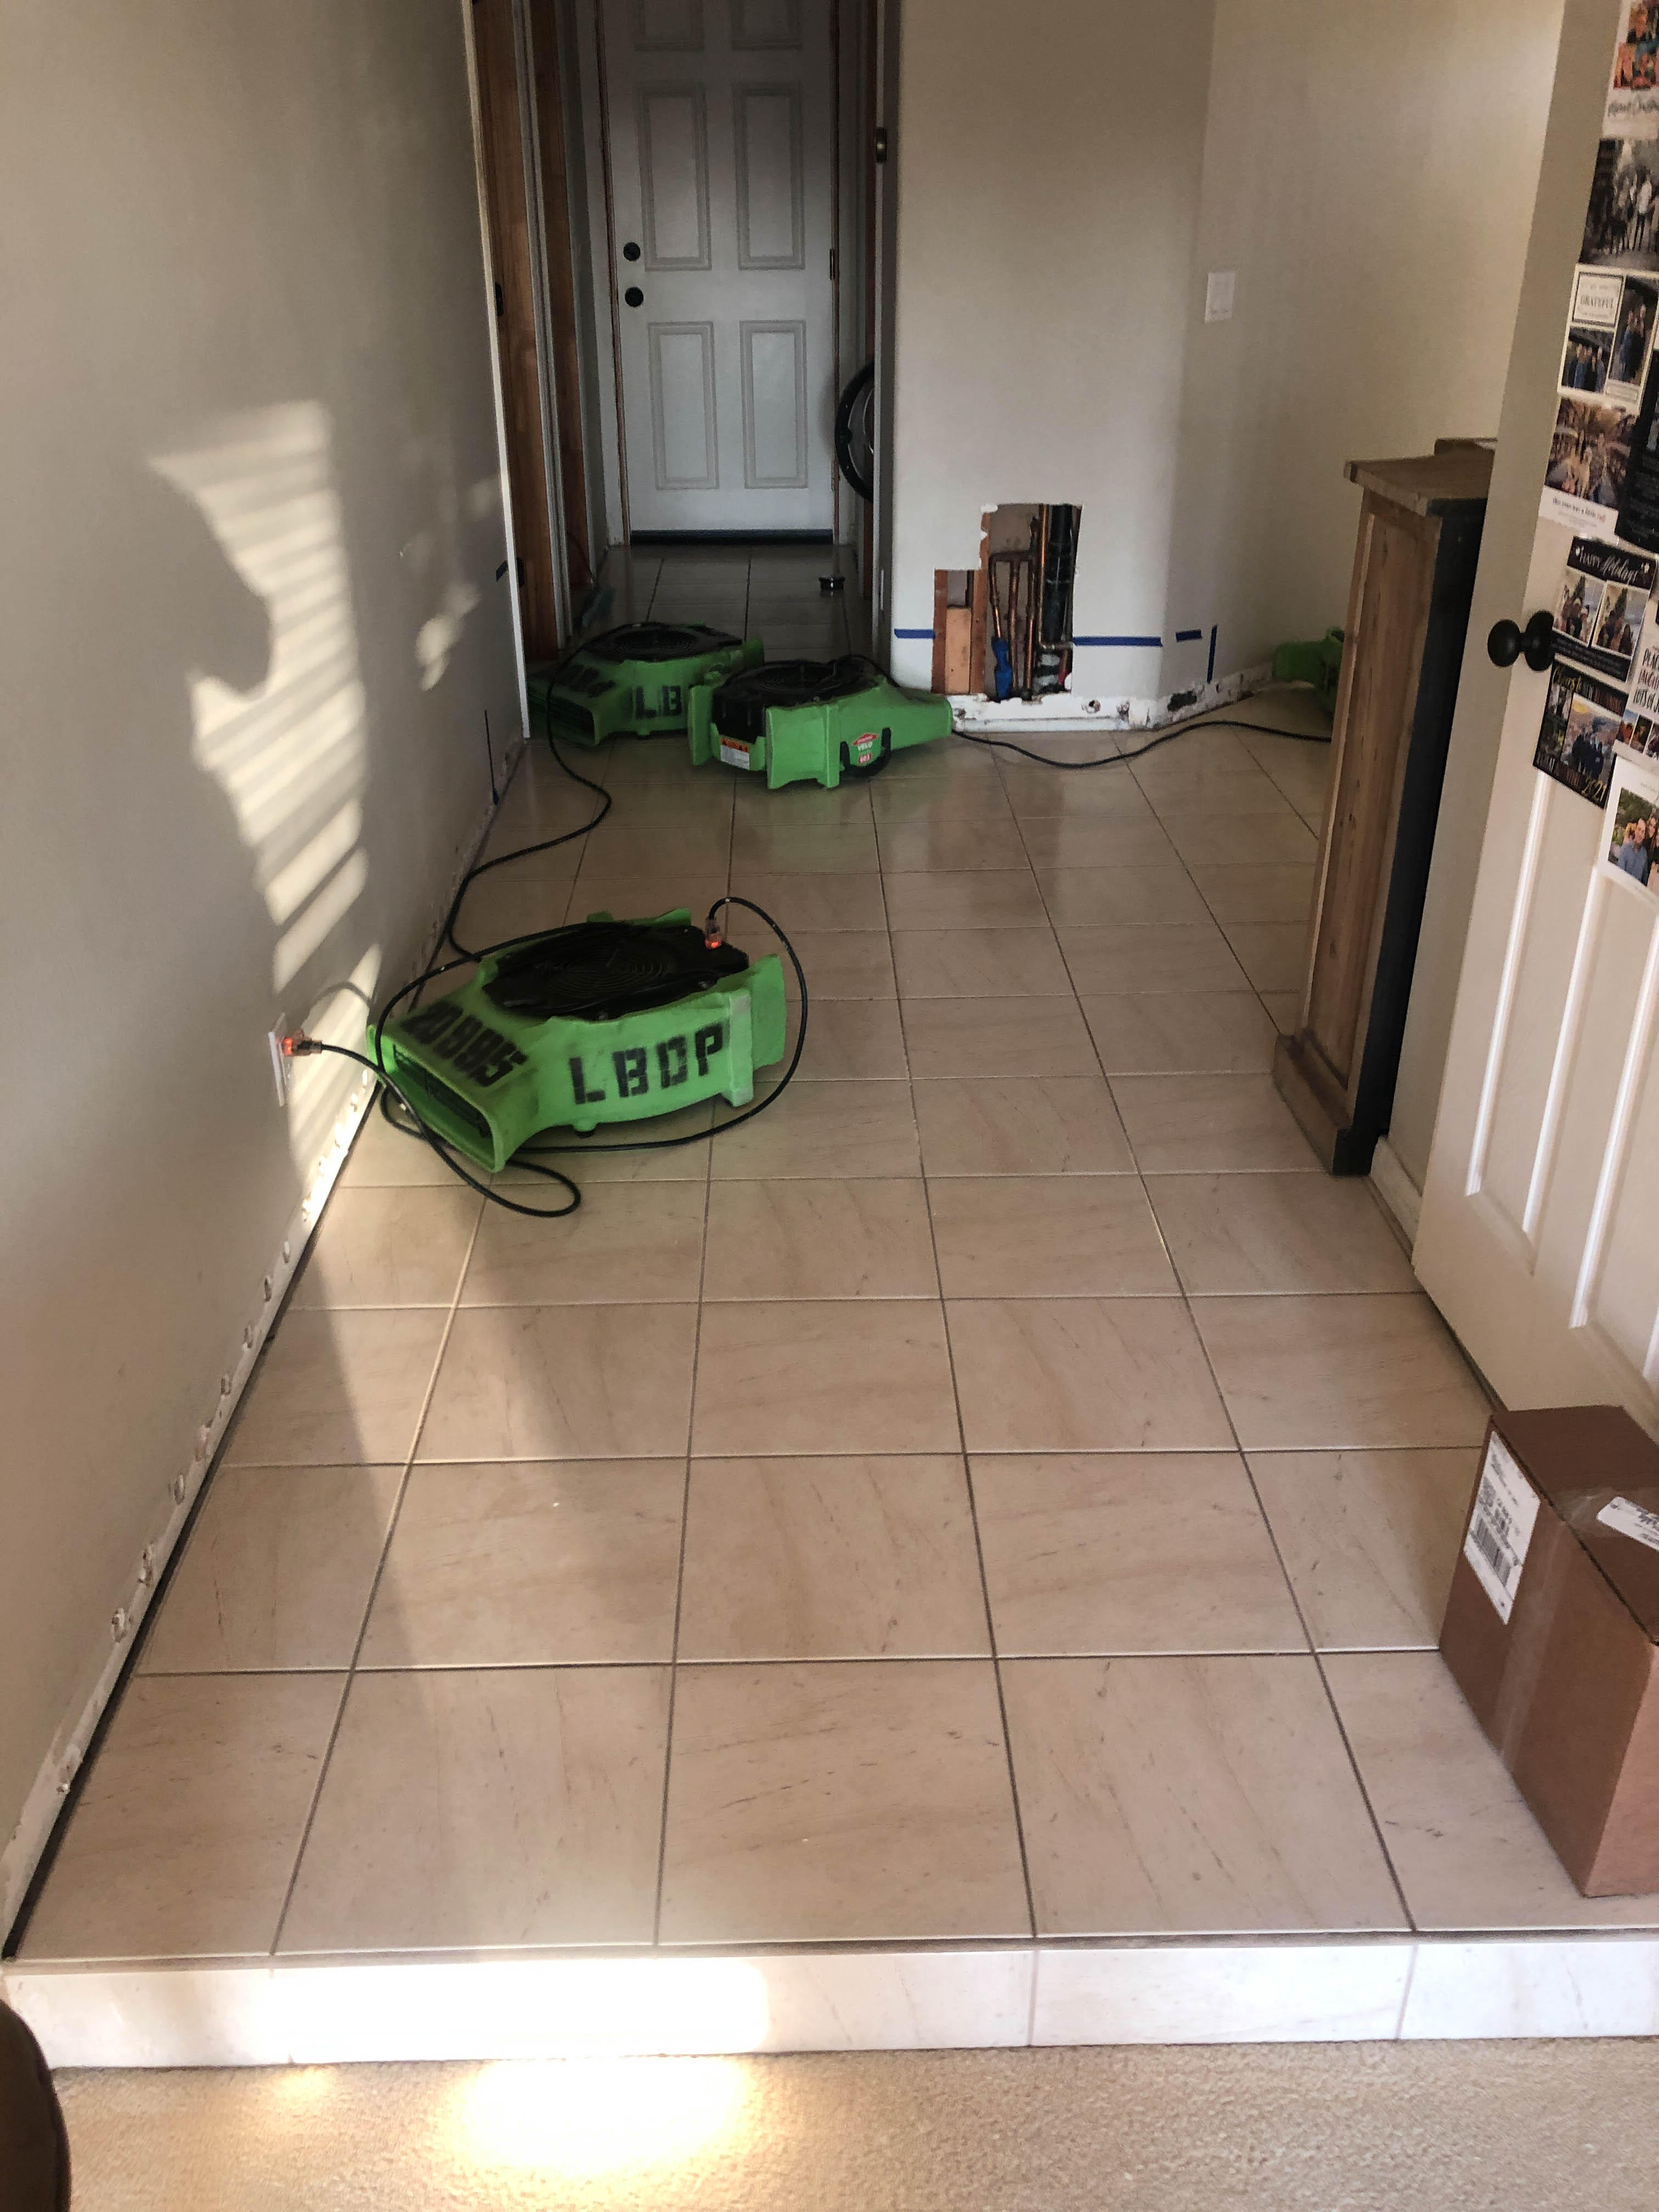 For all water damage needs, contact SERVPRO of Anaheim West.